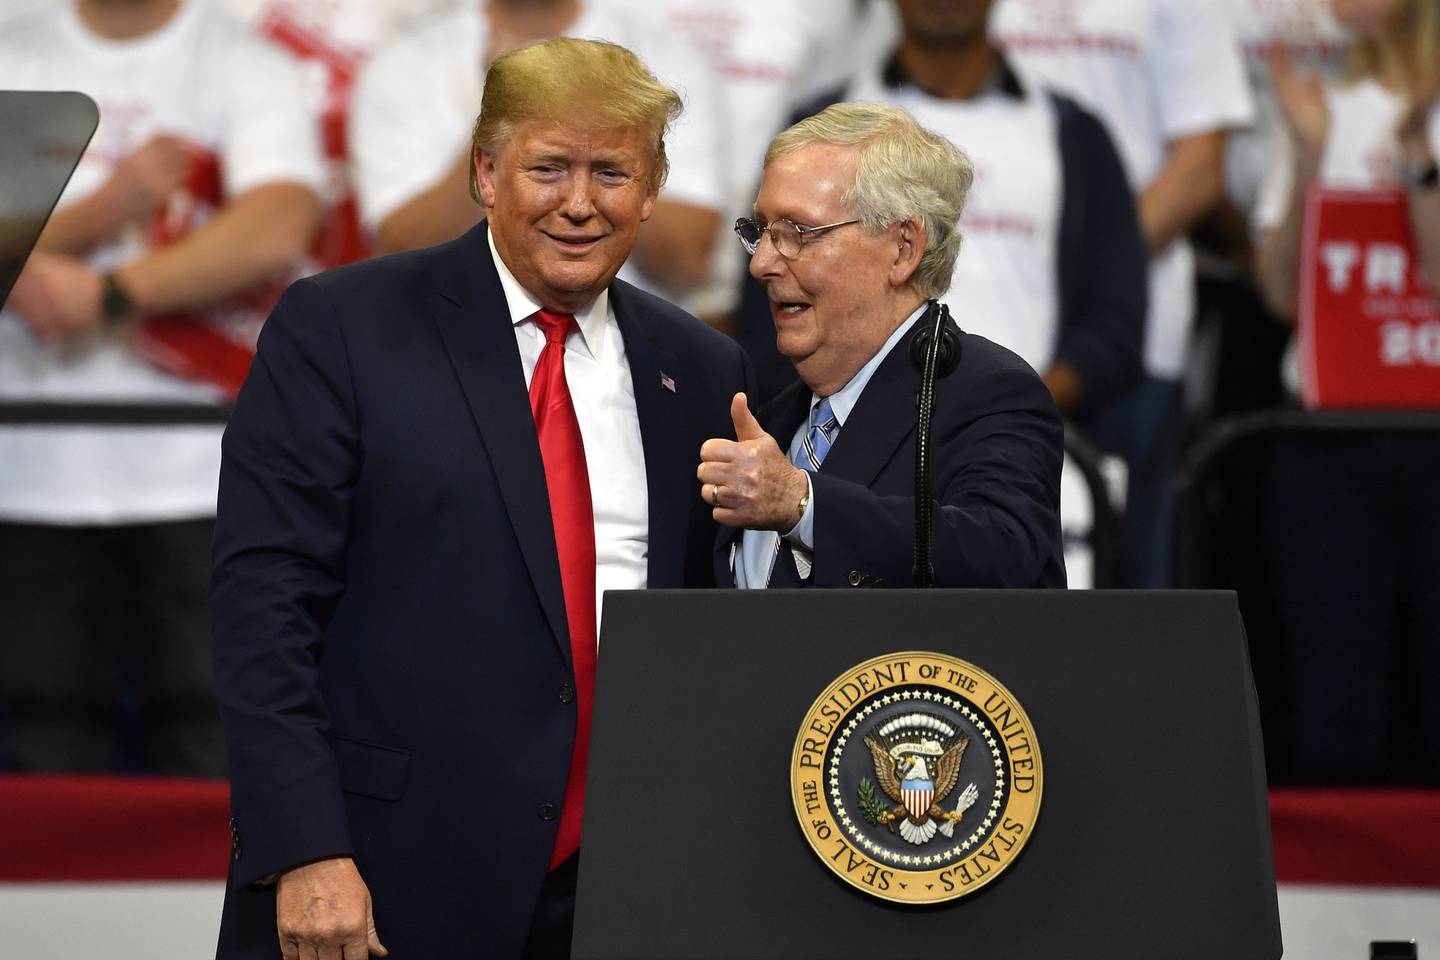 FILE - President Donald Trump, left, and Senate Majority Leader Mitch McConnell of Ky., greet each other during a campaign rally in Lexington, Ky., Nov. 4, 2019. McConnell is the highest ranking Republican in Congress who has yet to endorse Donald Trump's bid to return to the White House. But that's potentially about to change. McConnell's political team and Trump's campaign have been in talks over a possible endorsement and a strategy to unite Republicans on the party's ticket for the November election. (AP Photo/Timothy D. Easley, File)